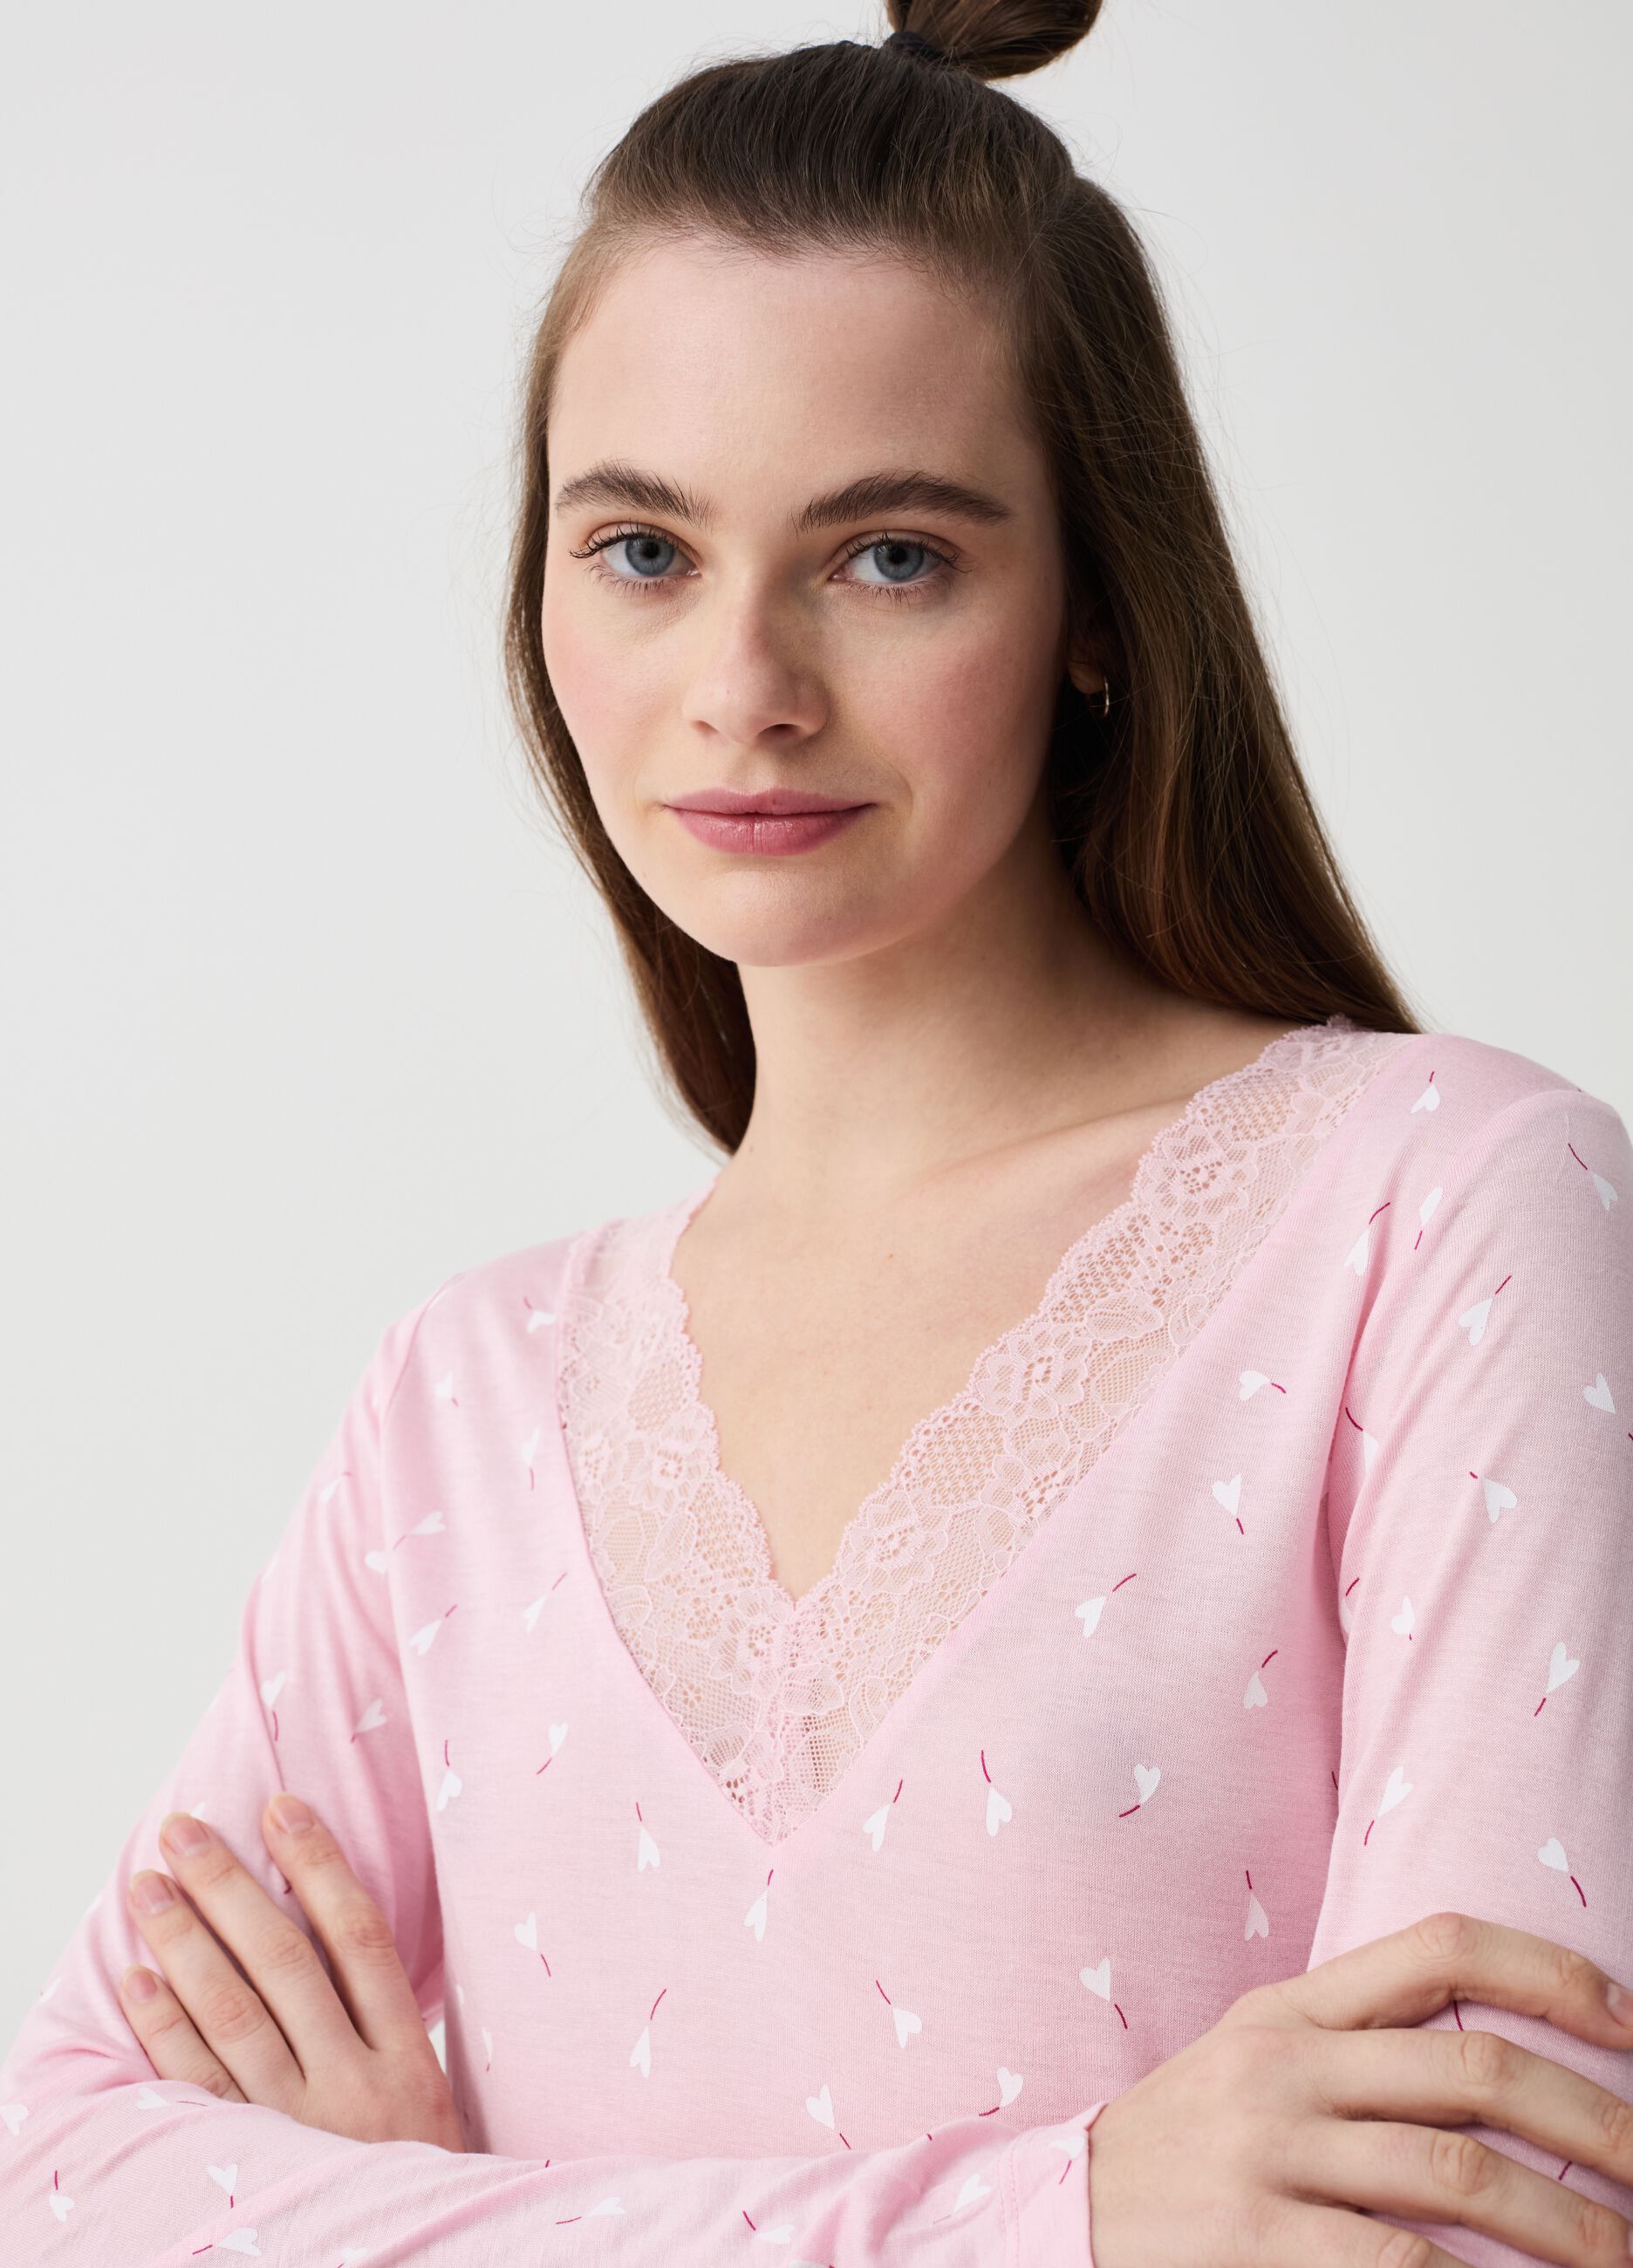 Nightdress with lace and hearts pattern